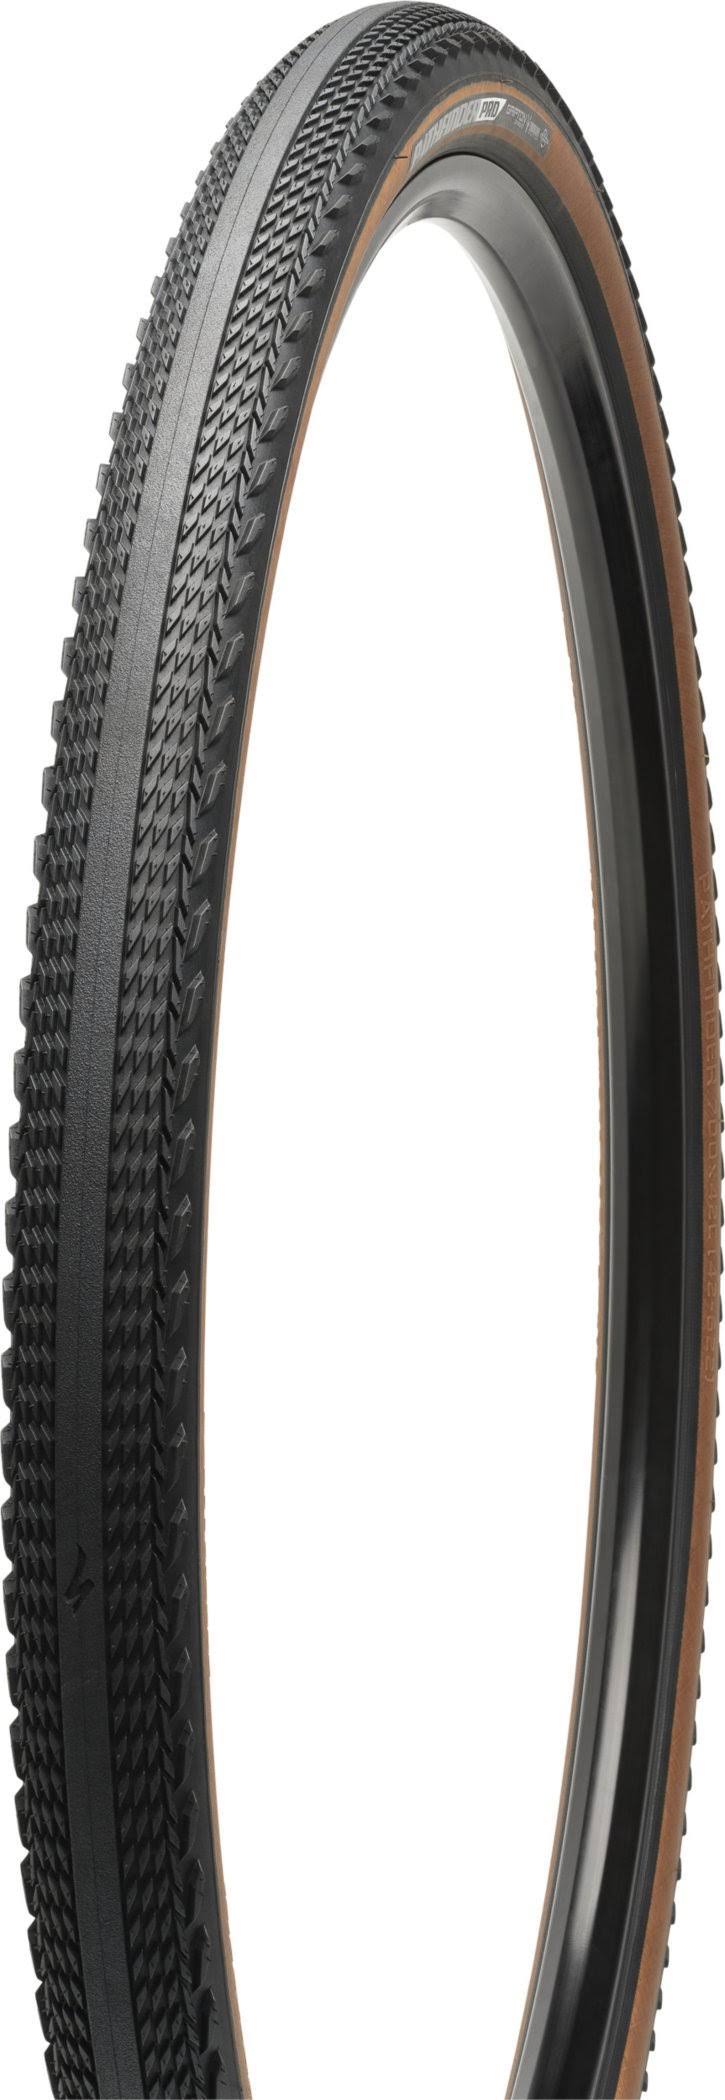 Specialized Pathfinder Pro 2Bliss Ready Tire-Transparent Sidewalls